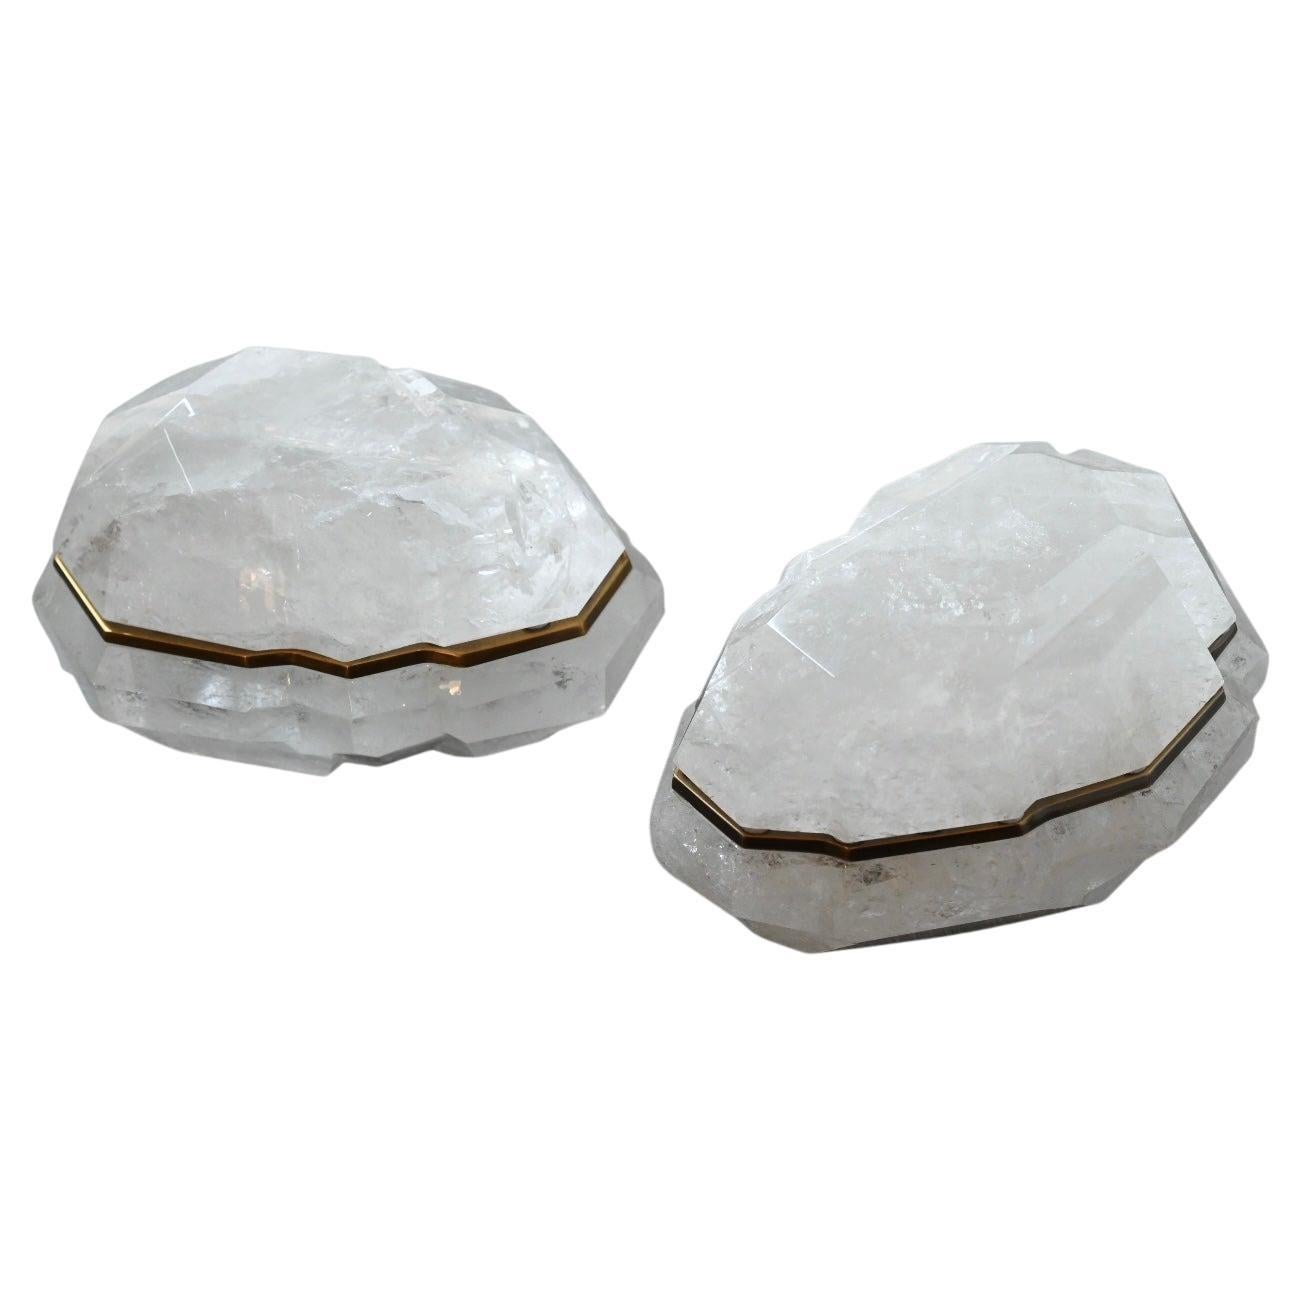 Multifaceted Rock Crystal Boxes by Phoenix For Sale